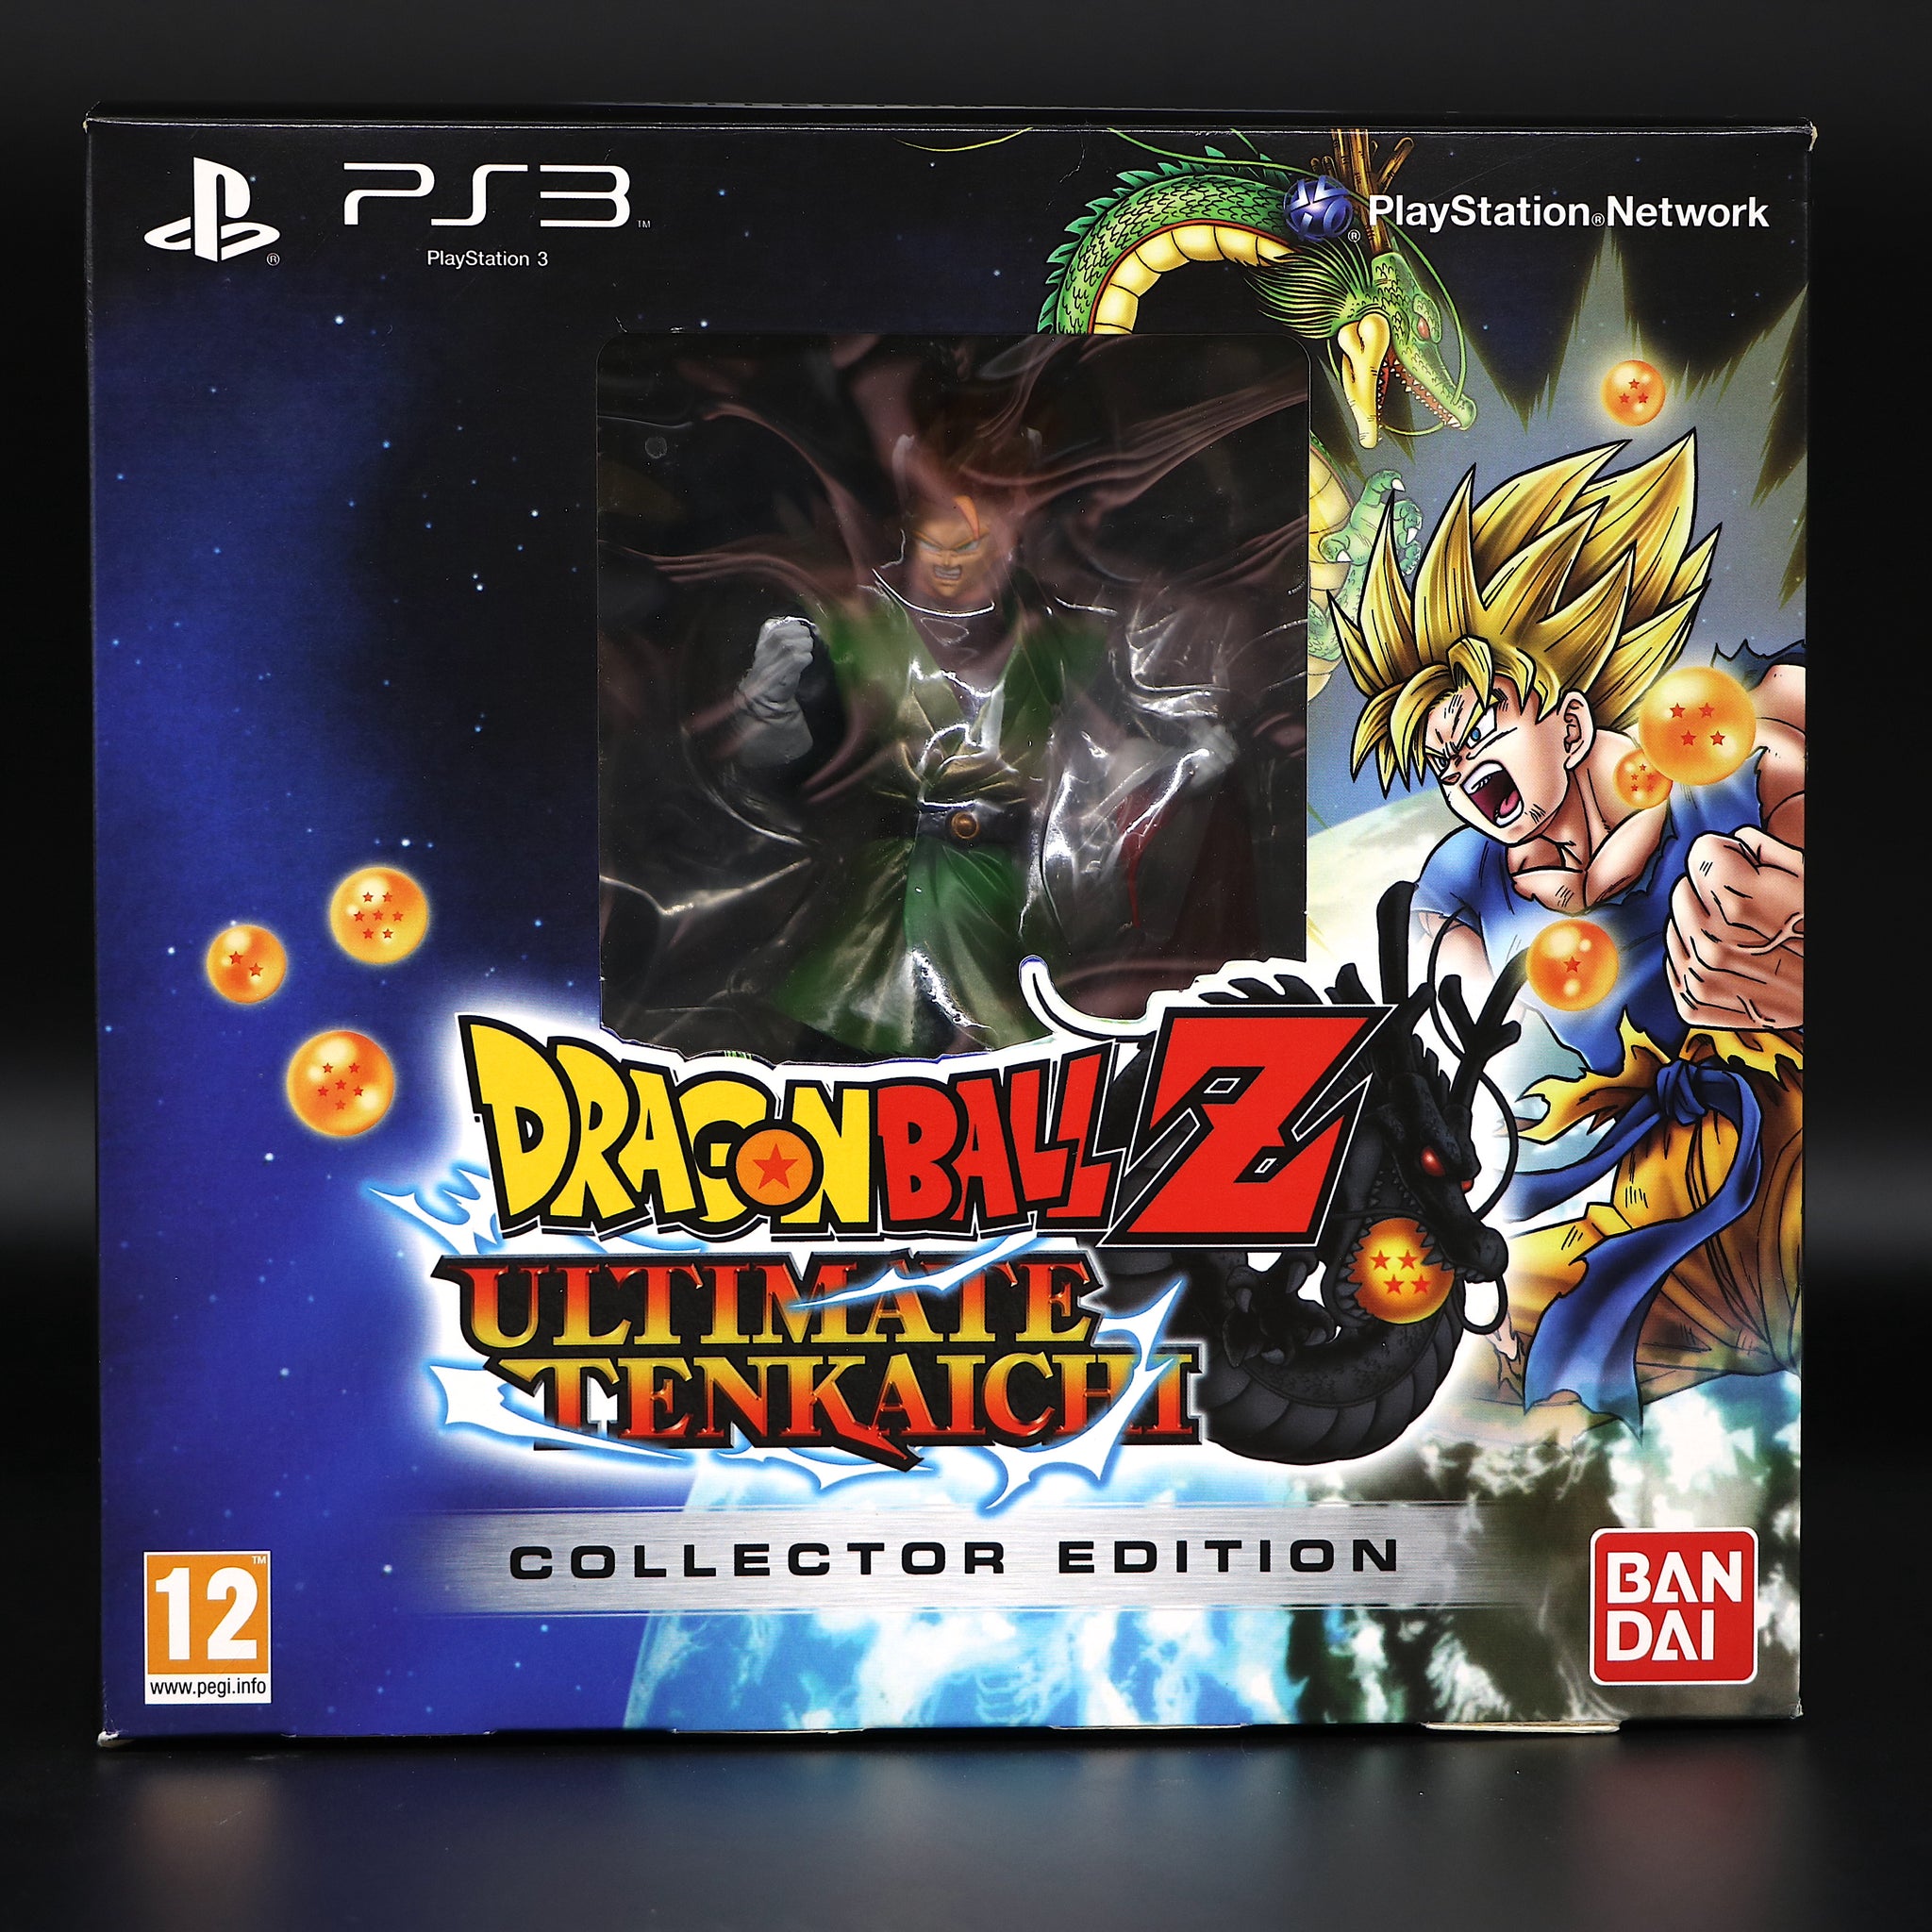 Dragonball Z Ultimate Tenkaichi  | Collectors Gohan Edition Game | Sony PS3